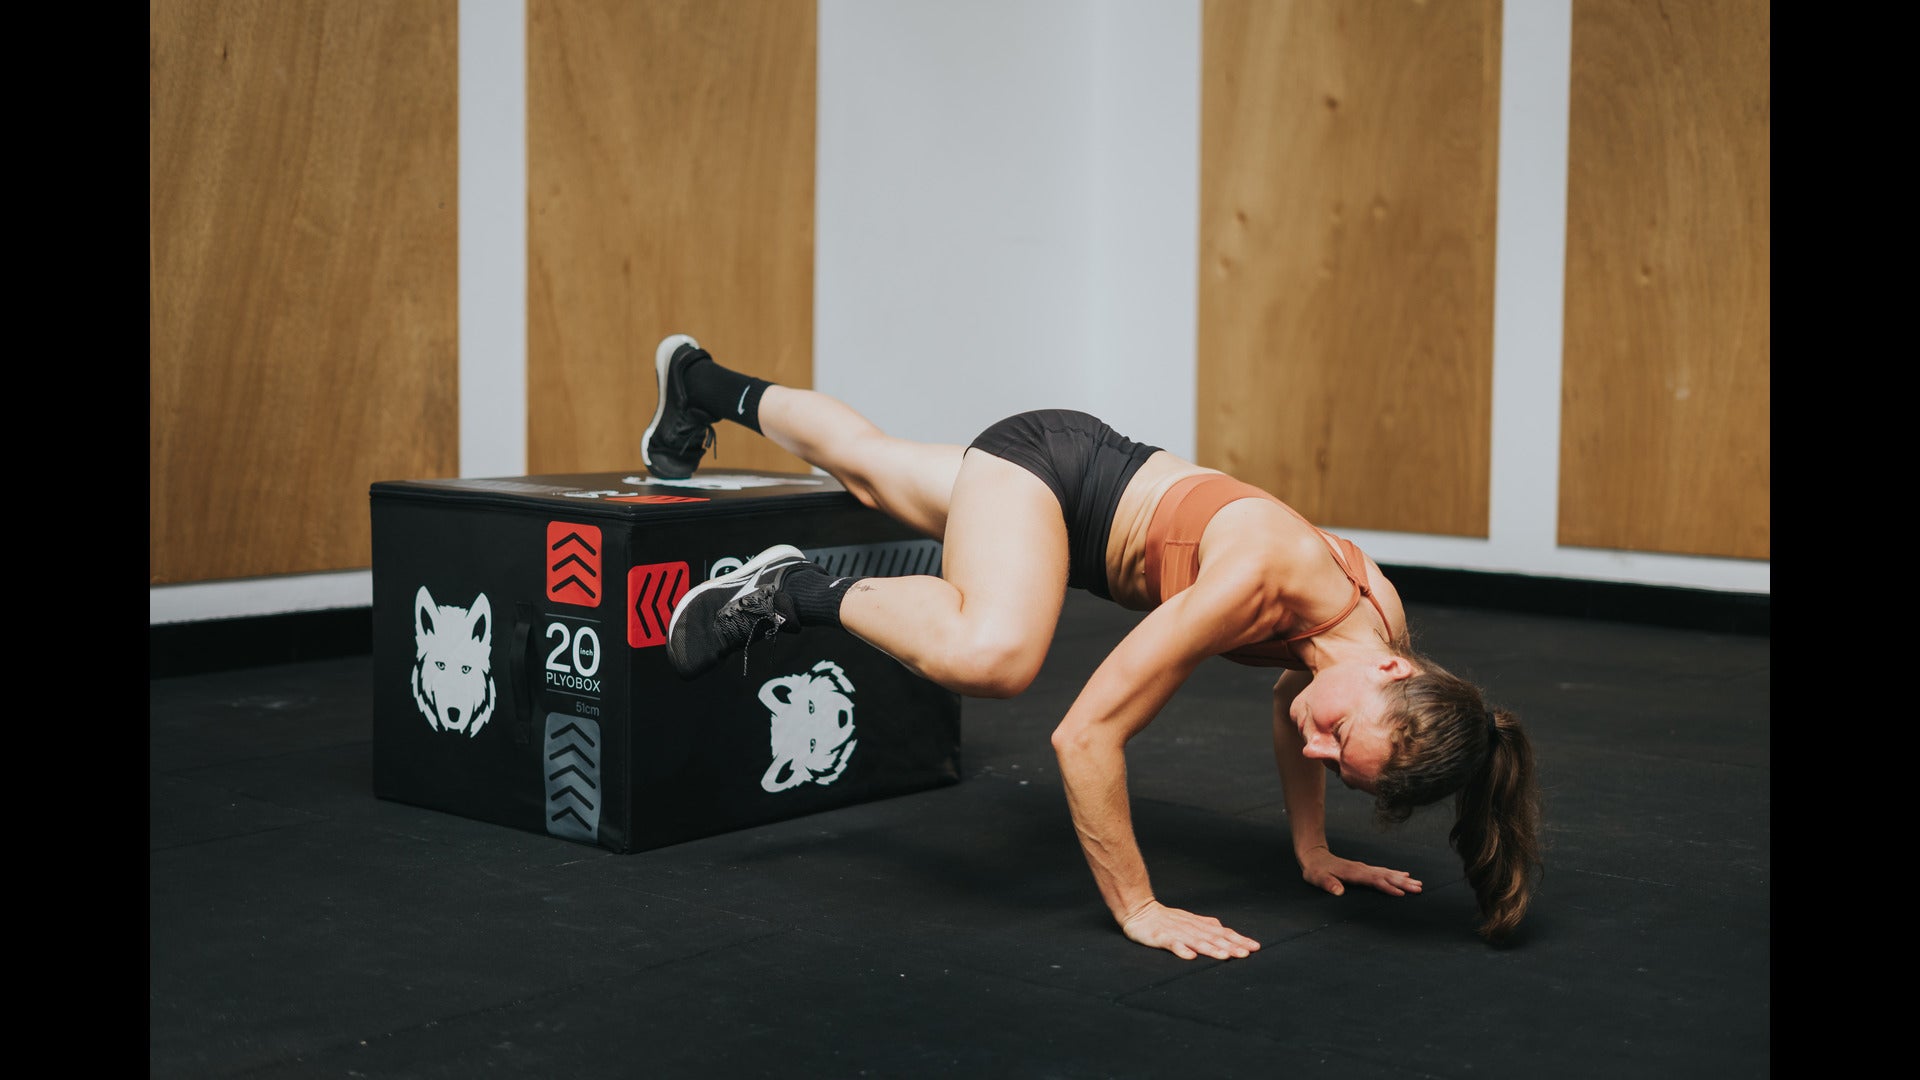 Plyo Box Soft: Enhance Your Training Safely and Effectively